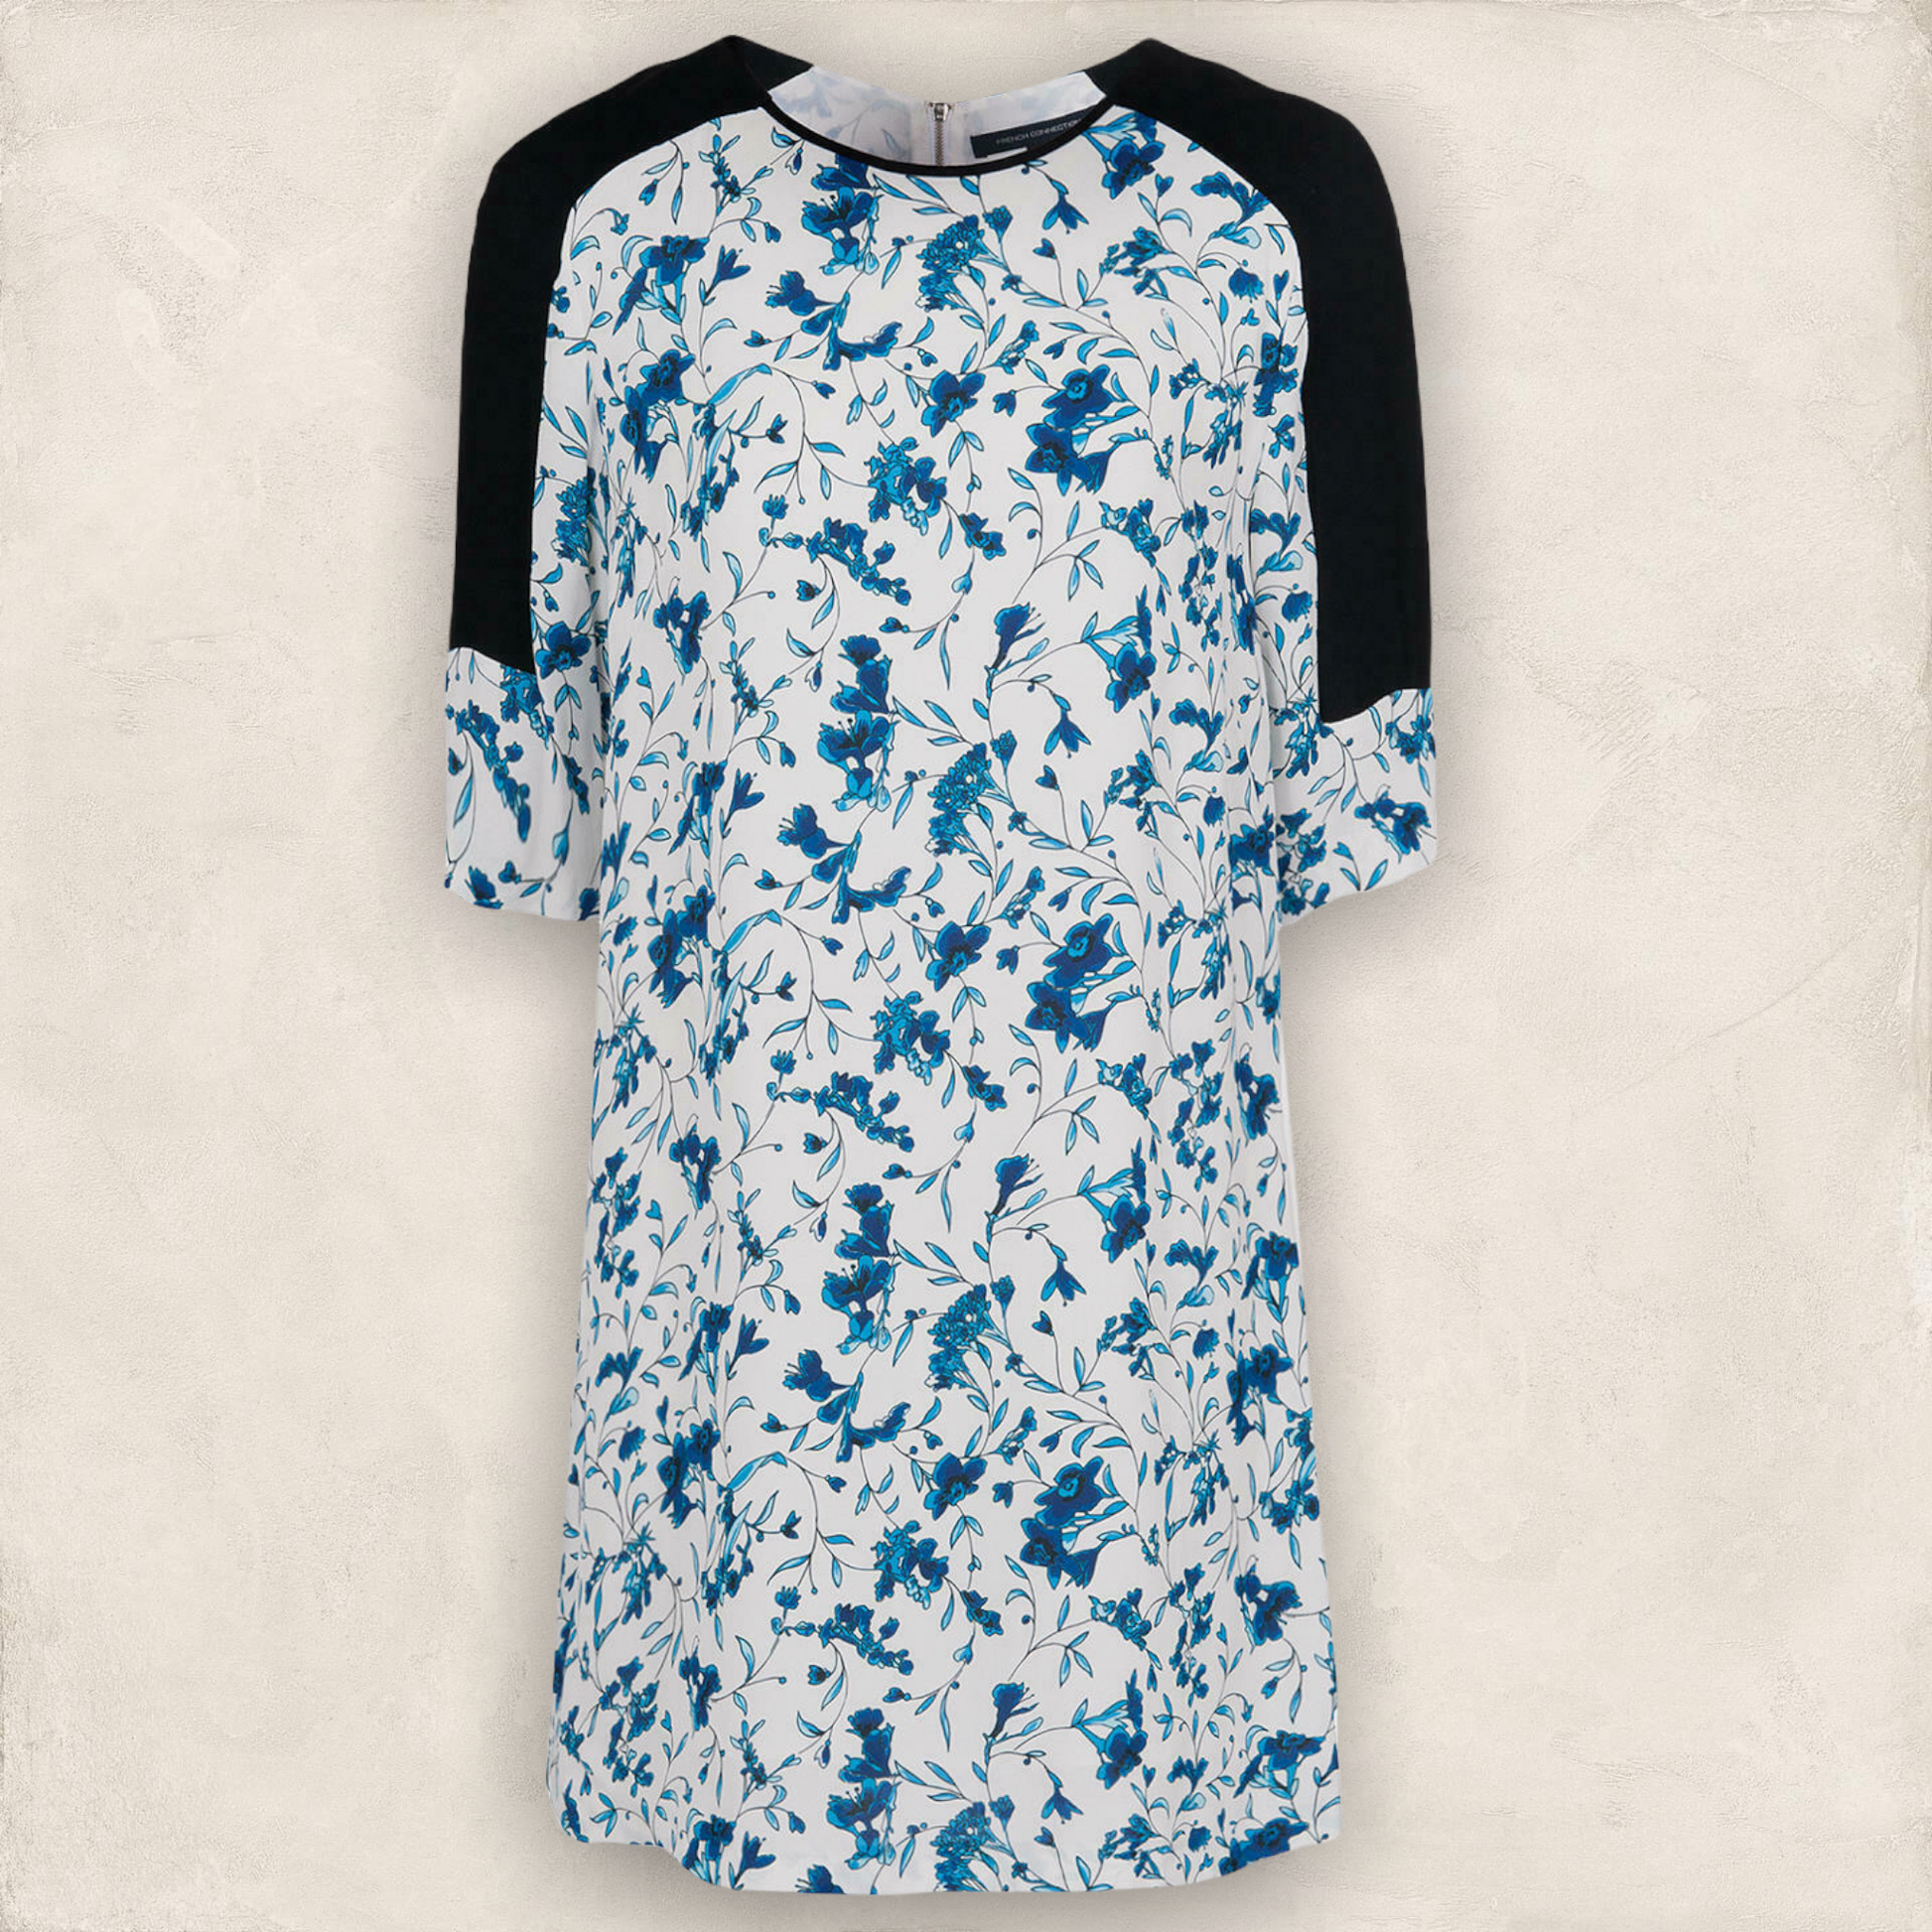 French Connection White Blue Floral Dress UK 6 US 2 EU 34 BNWT RRP £125.00 Timeless Fashions